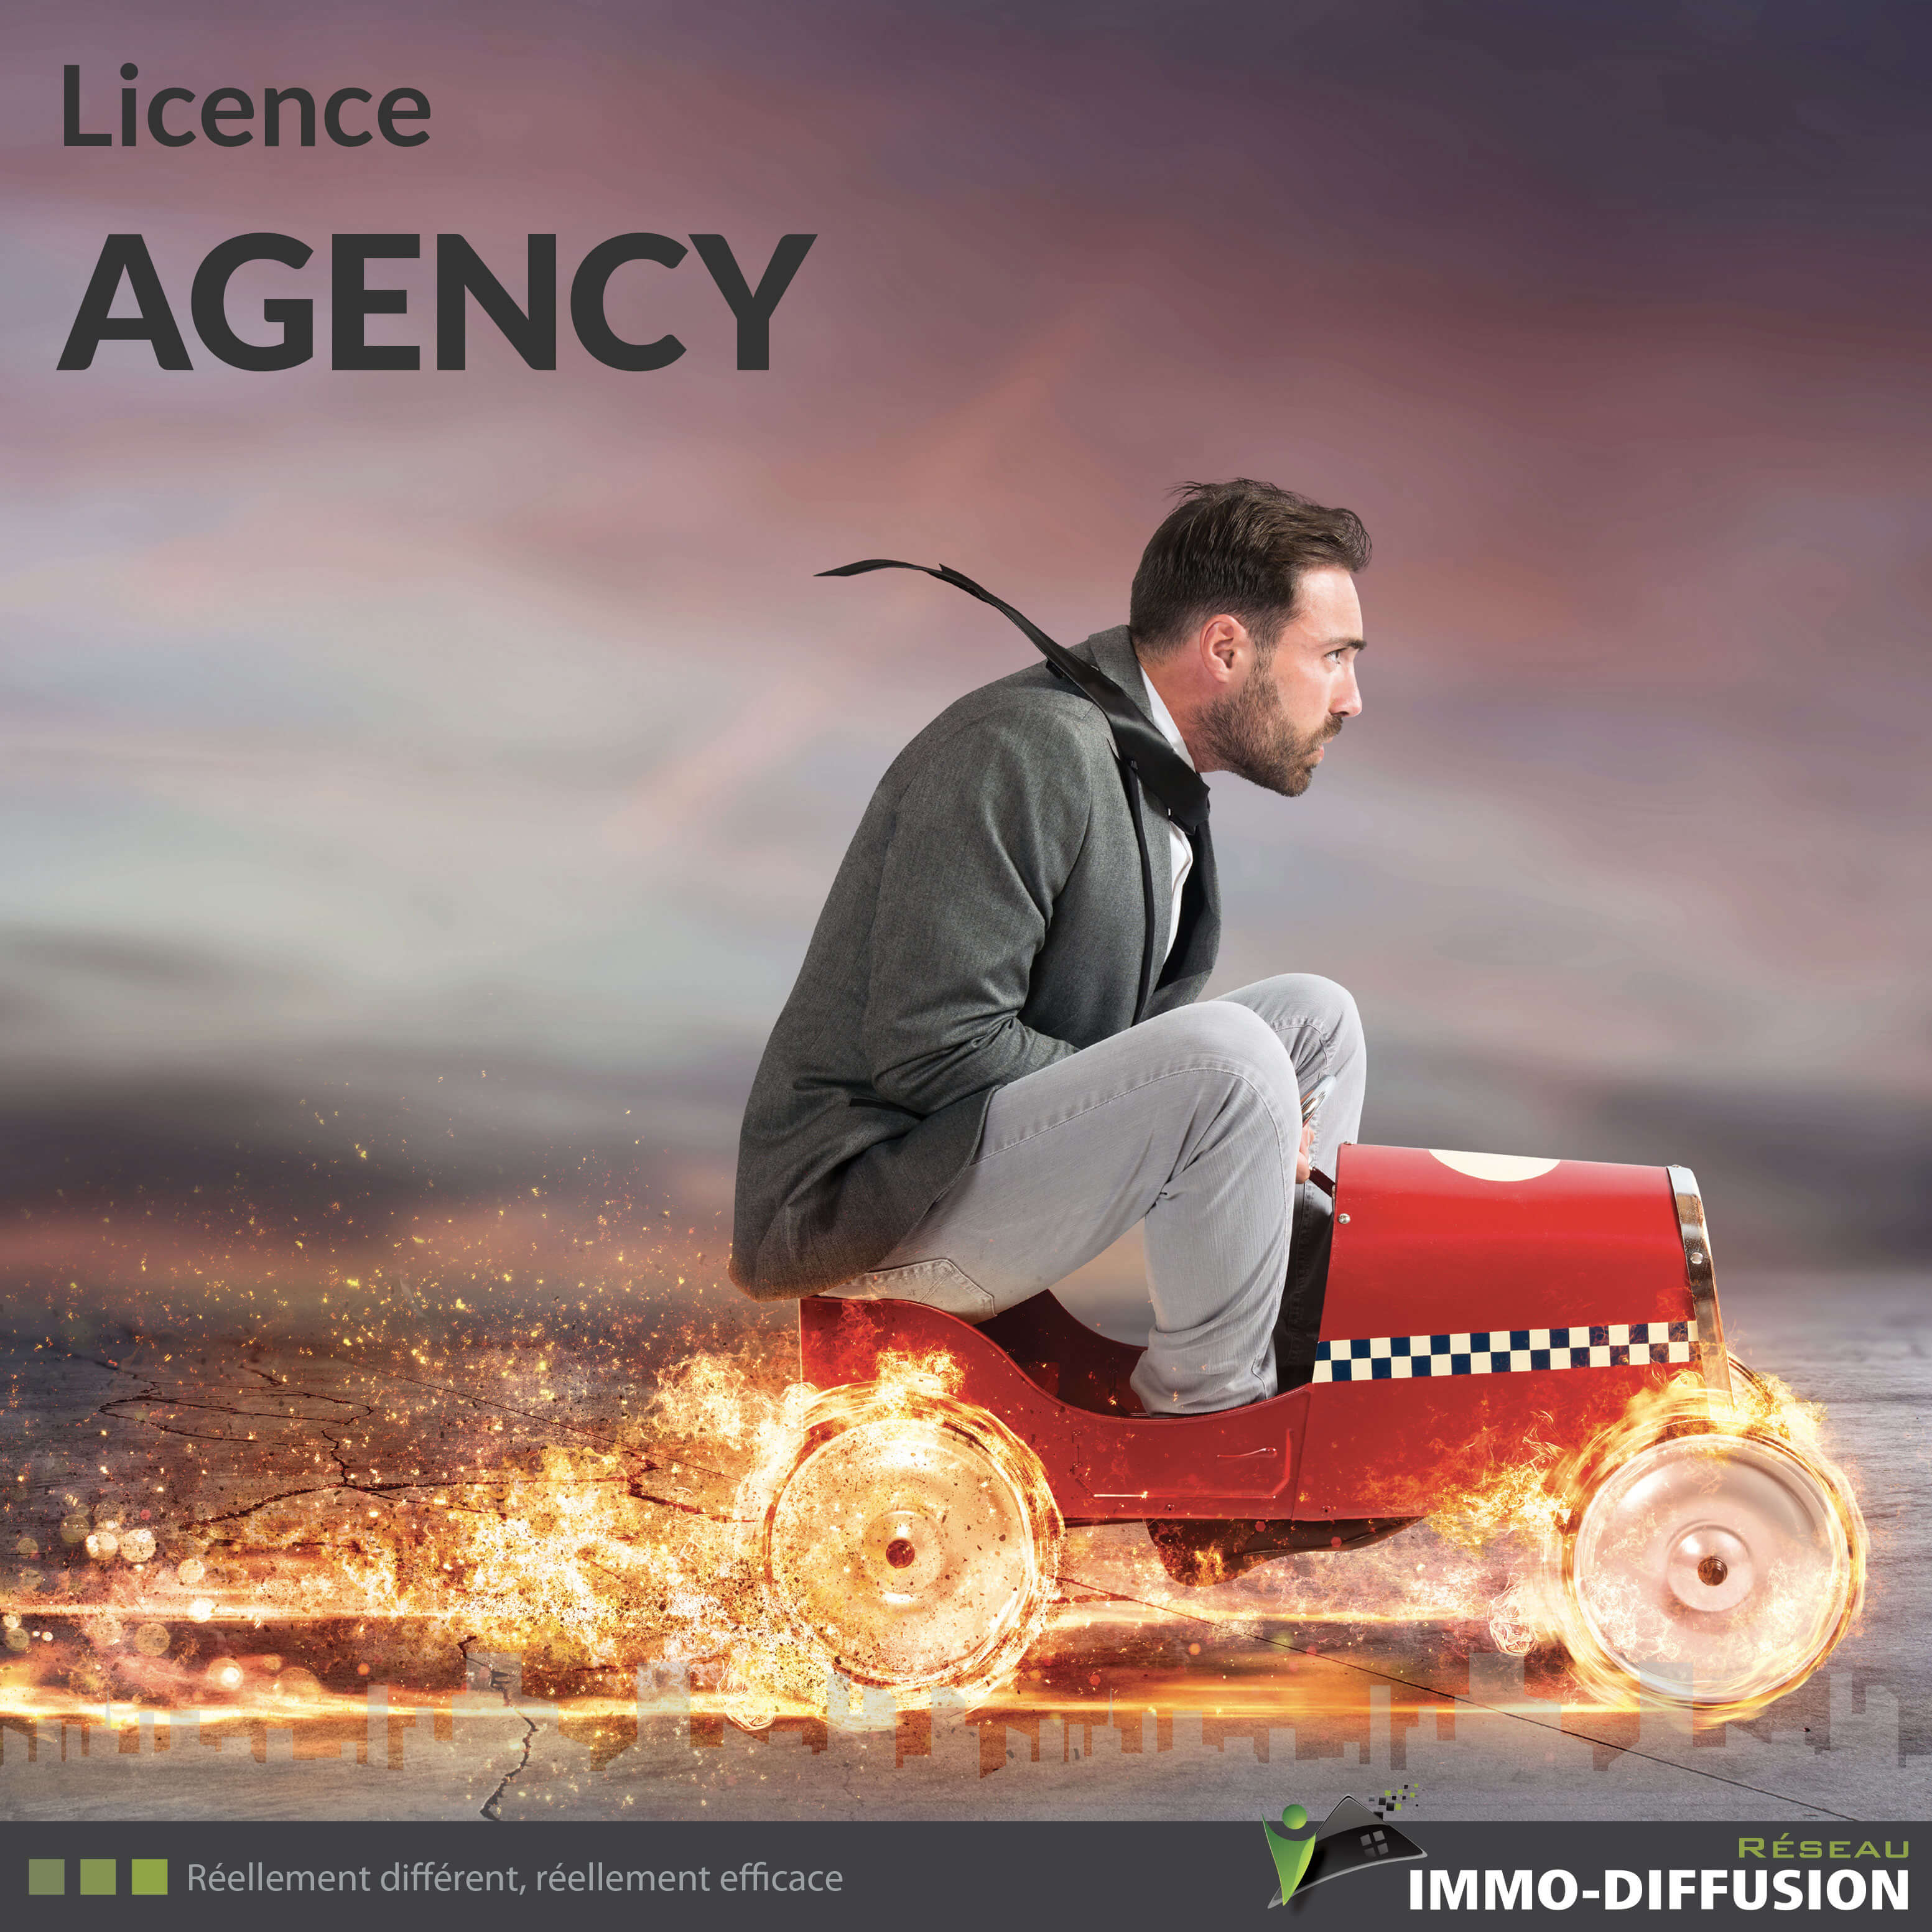 Licence AGENCY